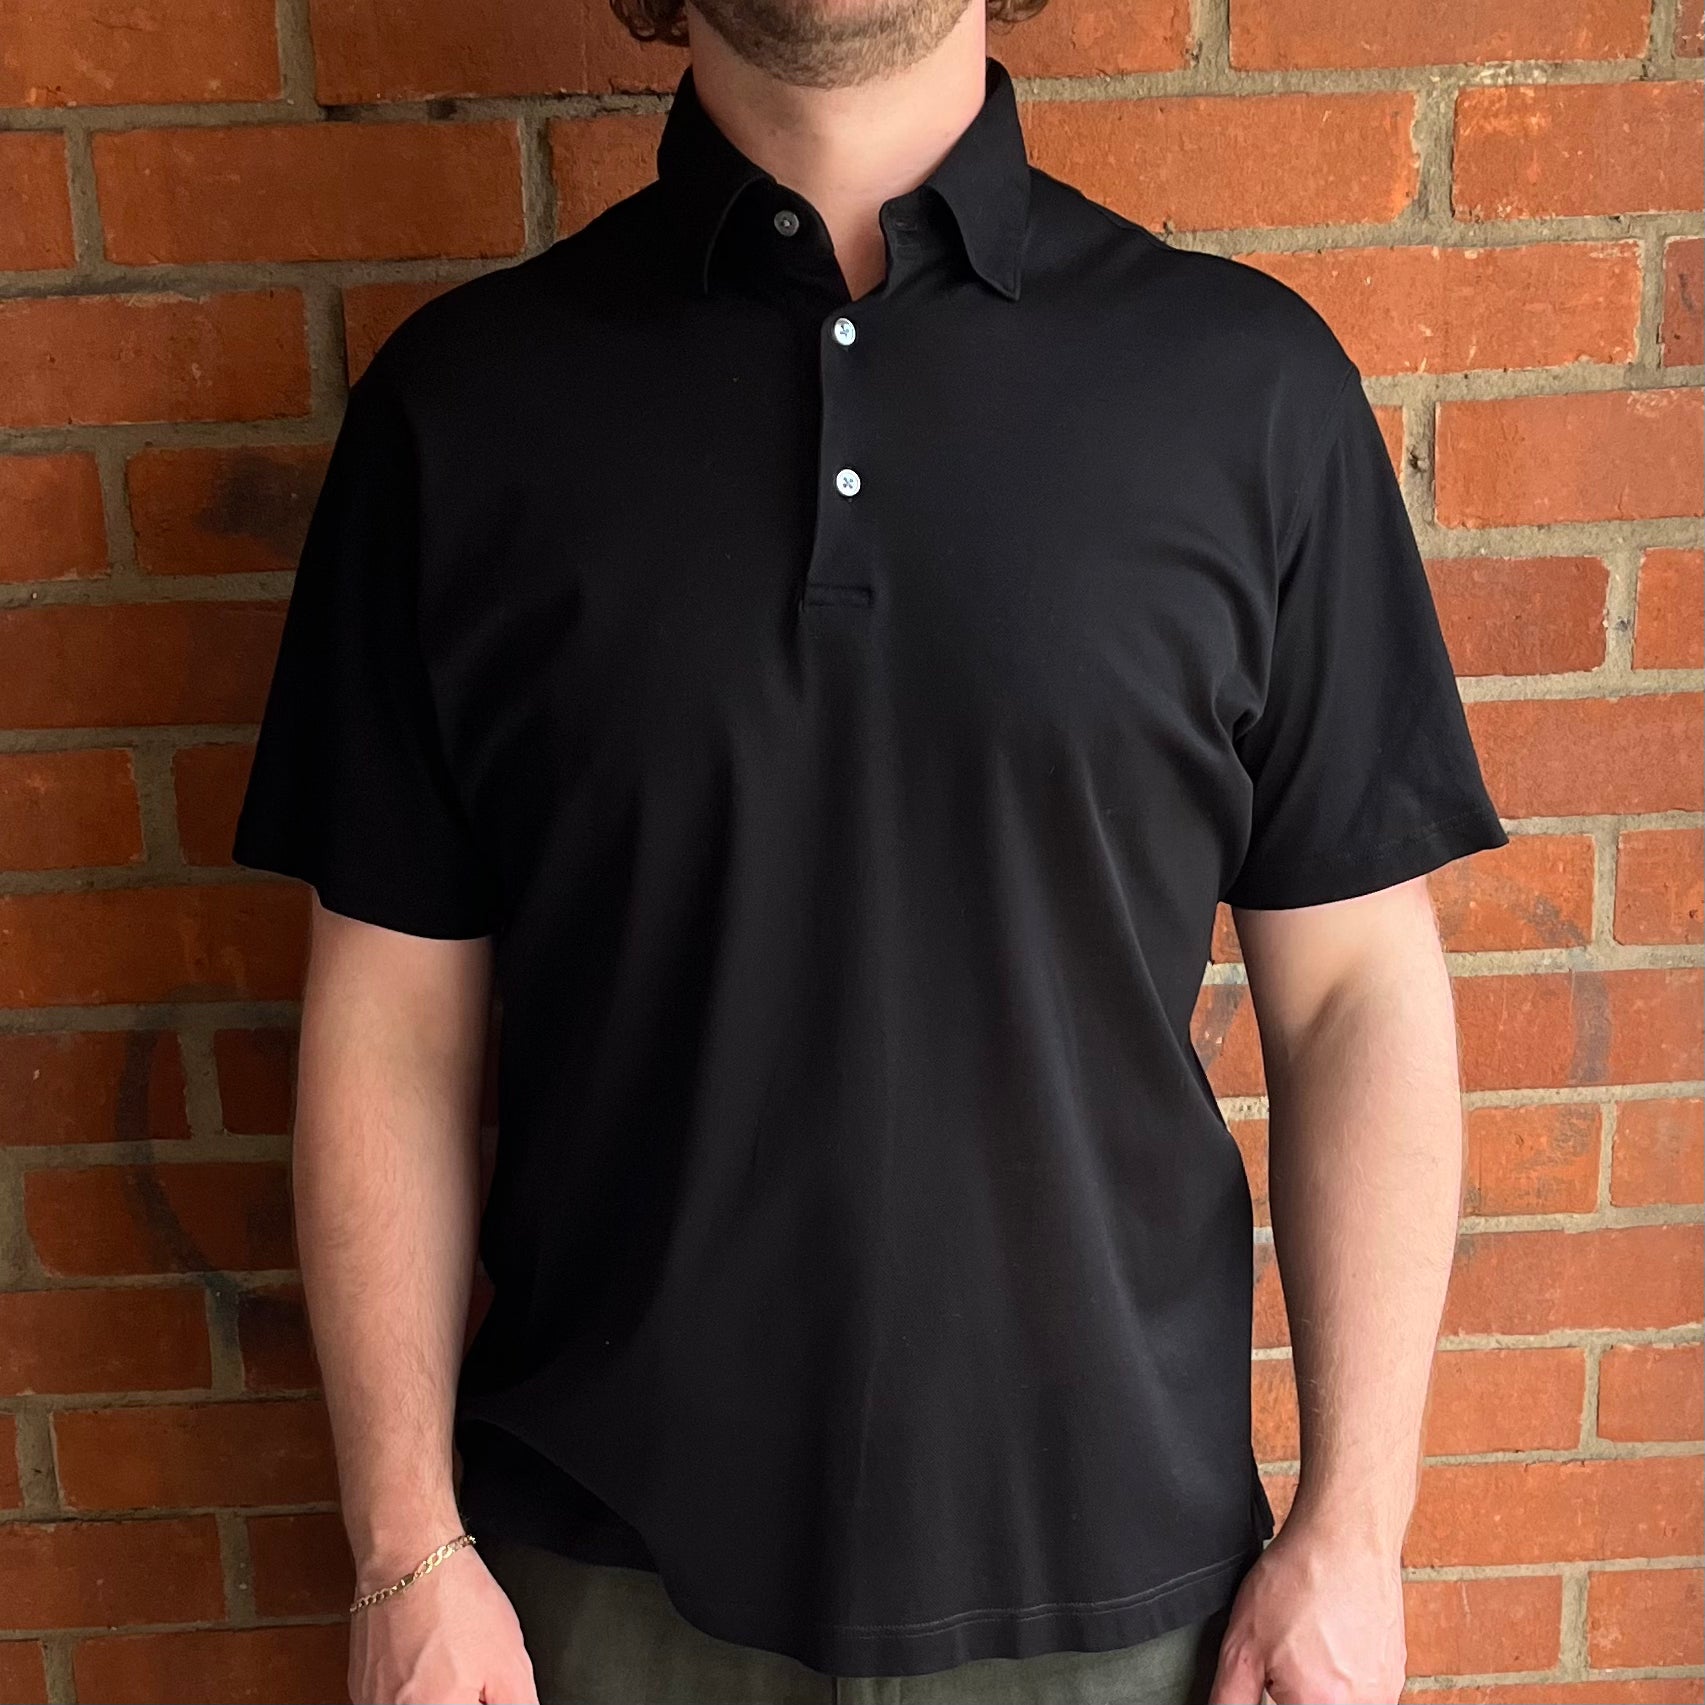 Black 100% Piquet Cotton polo shirt, lightweight breathable . 3 mother of pearls buttons. 